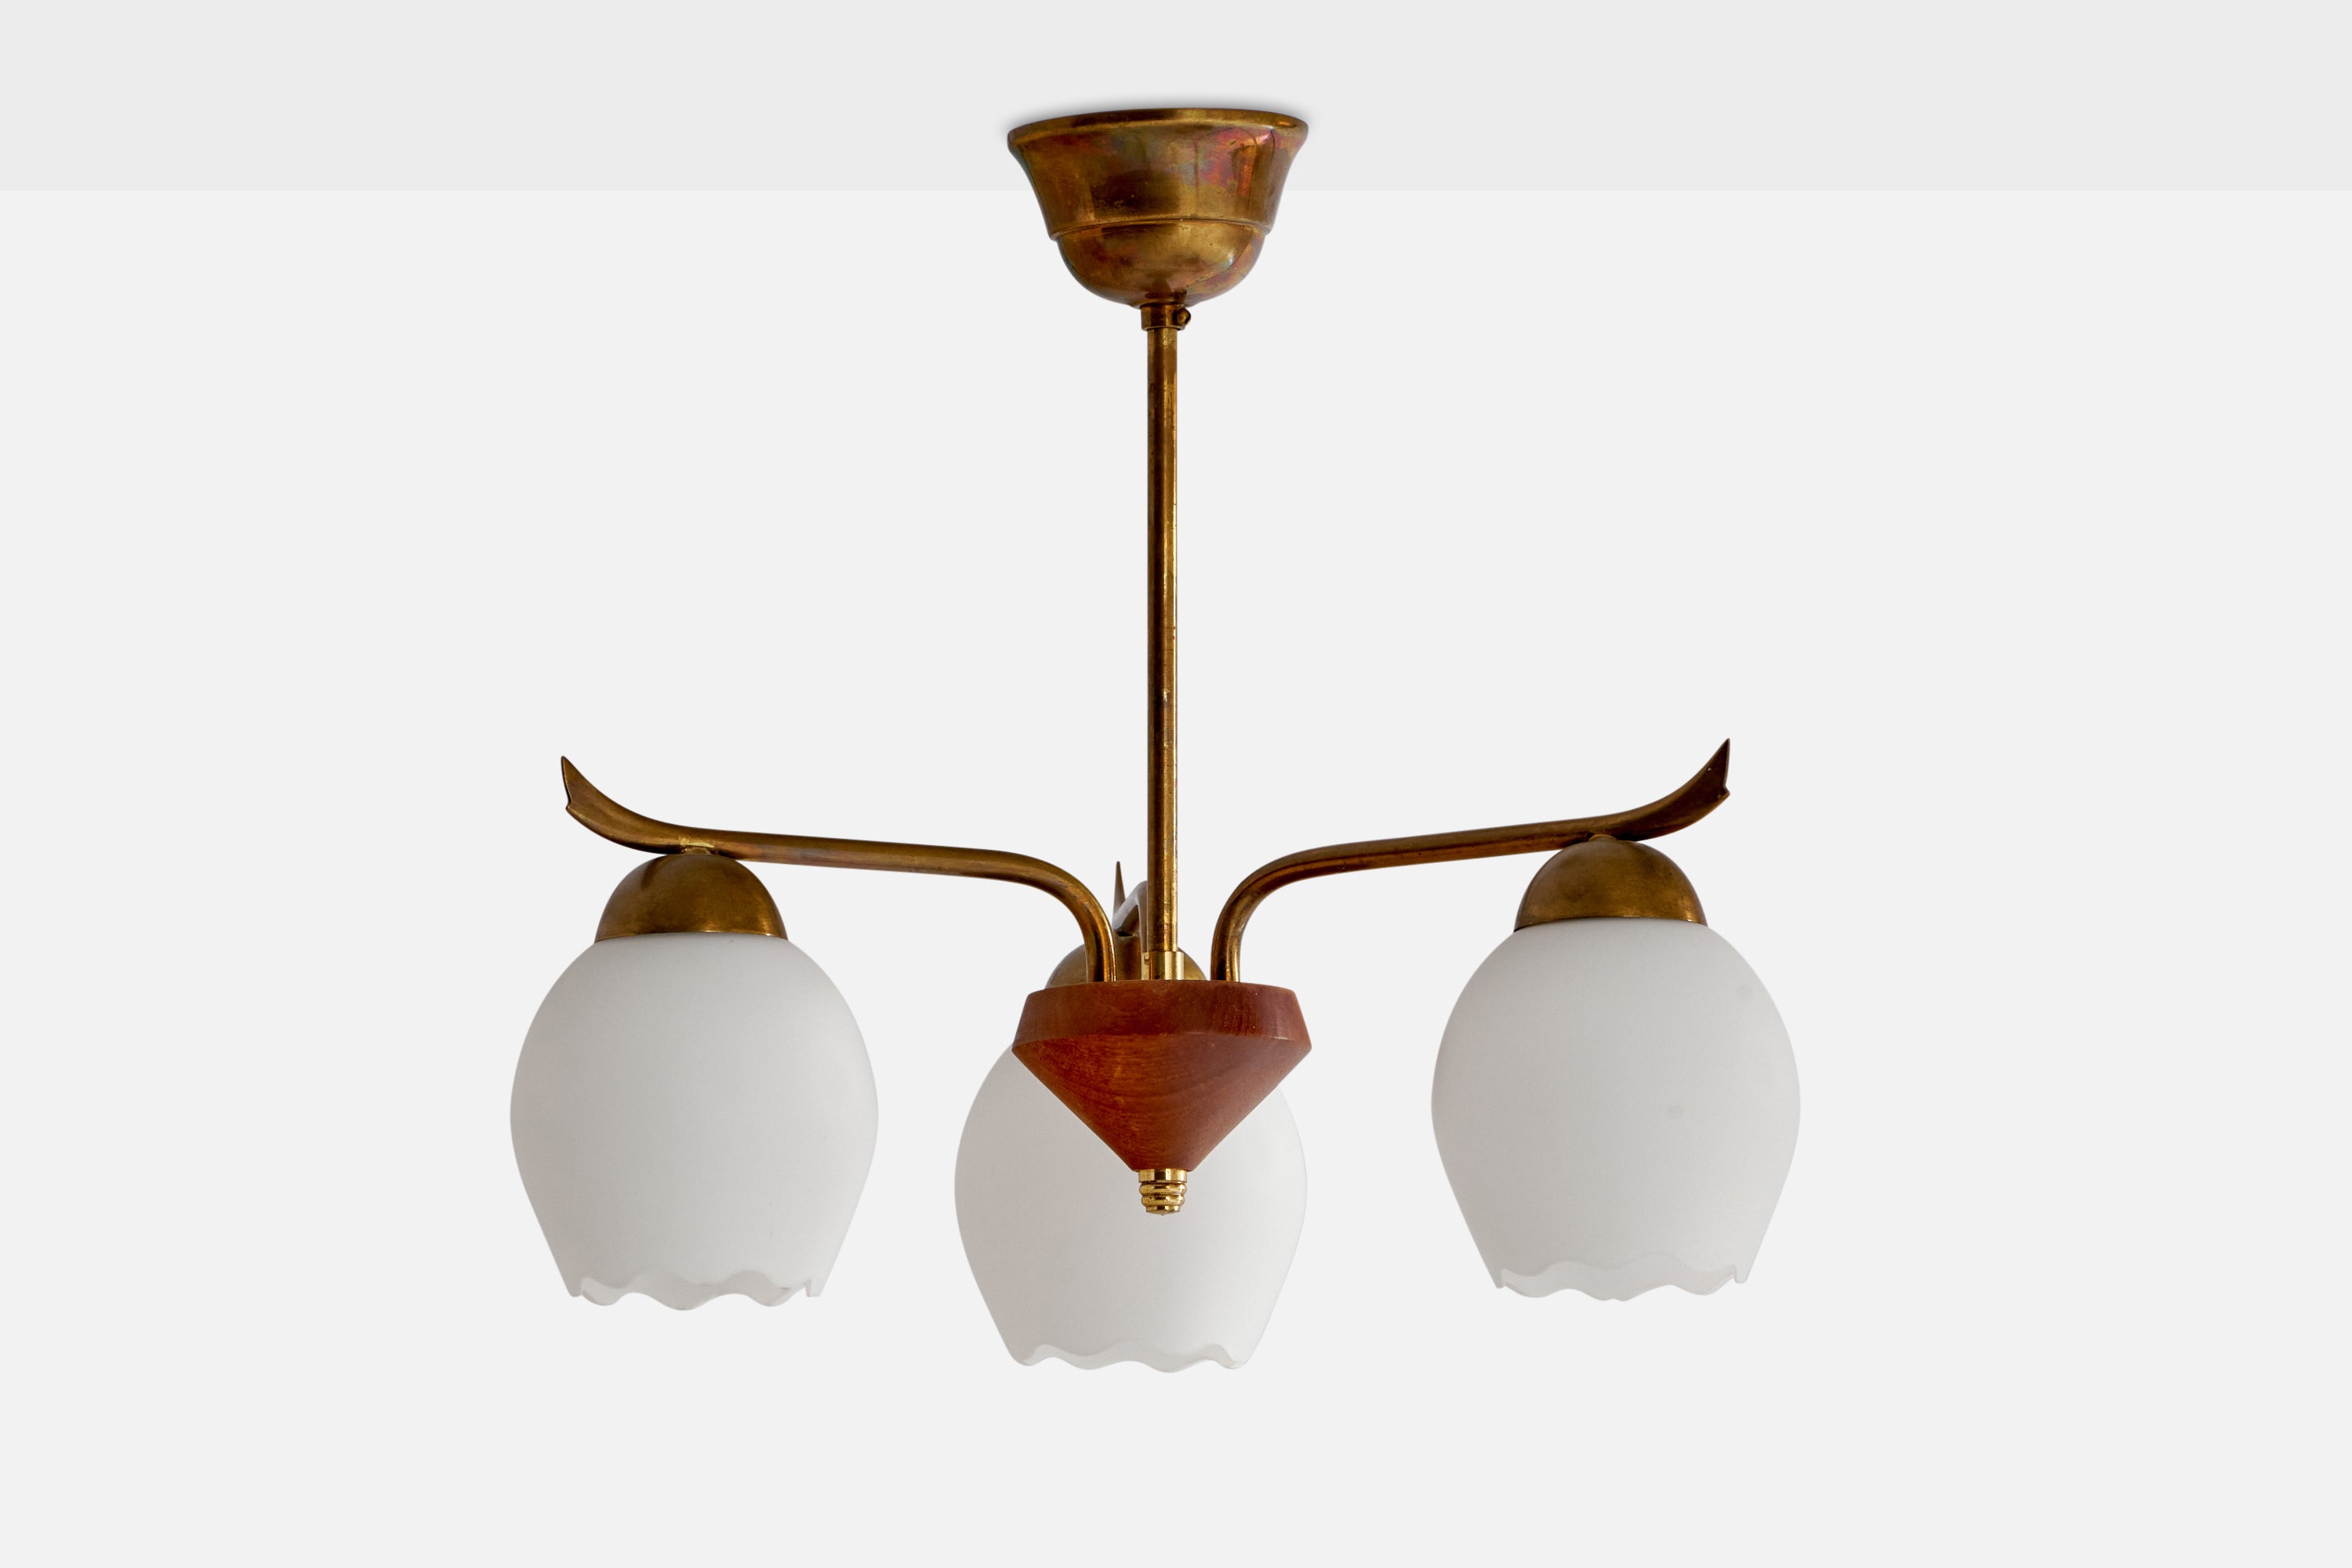 A brass, teak and opaline glass chandelier designed and produced in Sweden, 1950s.

Dimensions of canopy (inches): 2.3” H x 3.6” Diameter
Socket takes standard E-26 bulbs. 3 sockets.There is no maximum wattage stated on the fixture. All lighting